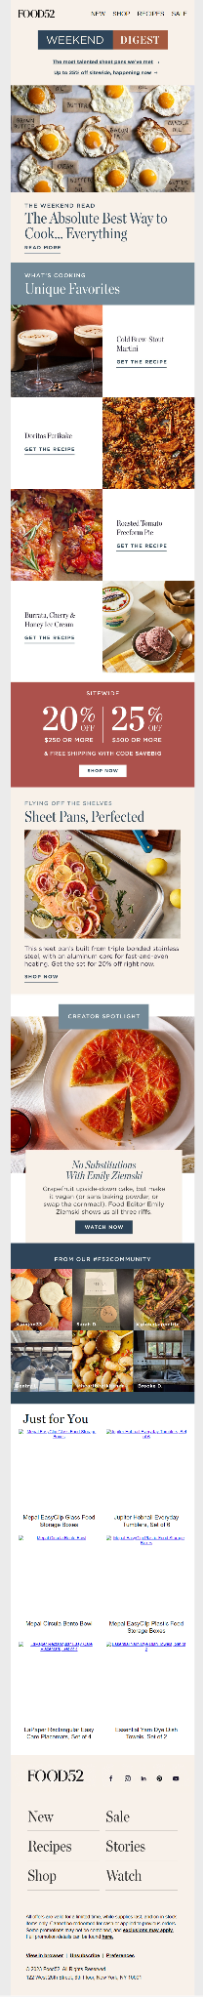 email from Food52